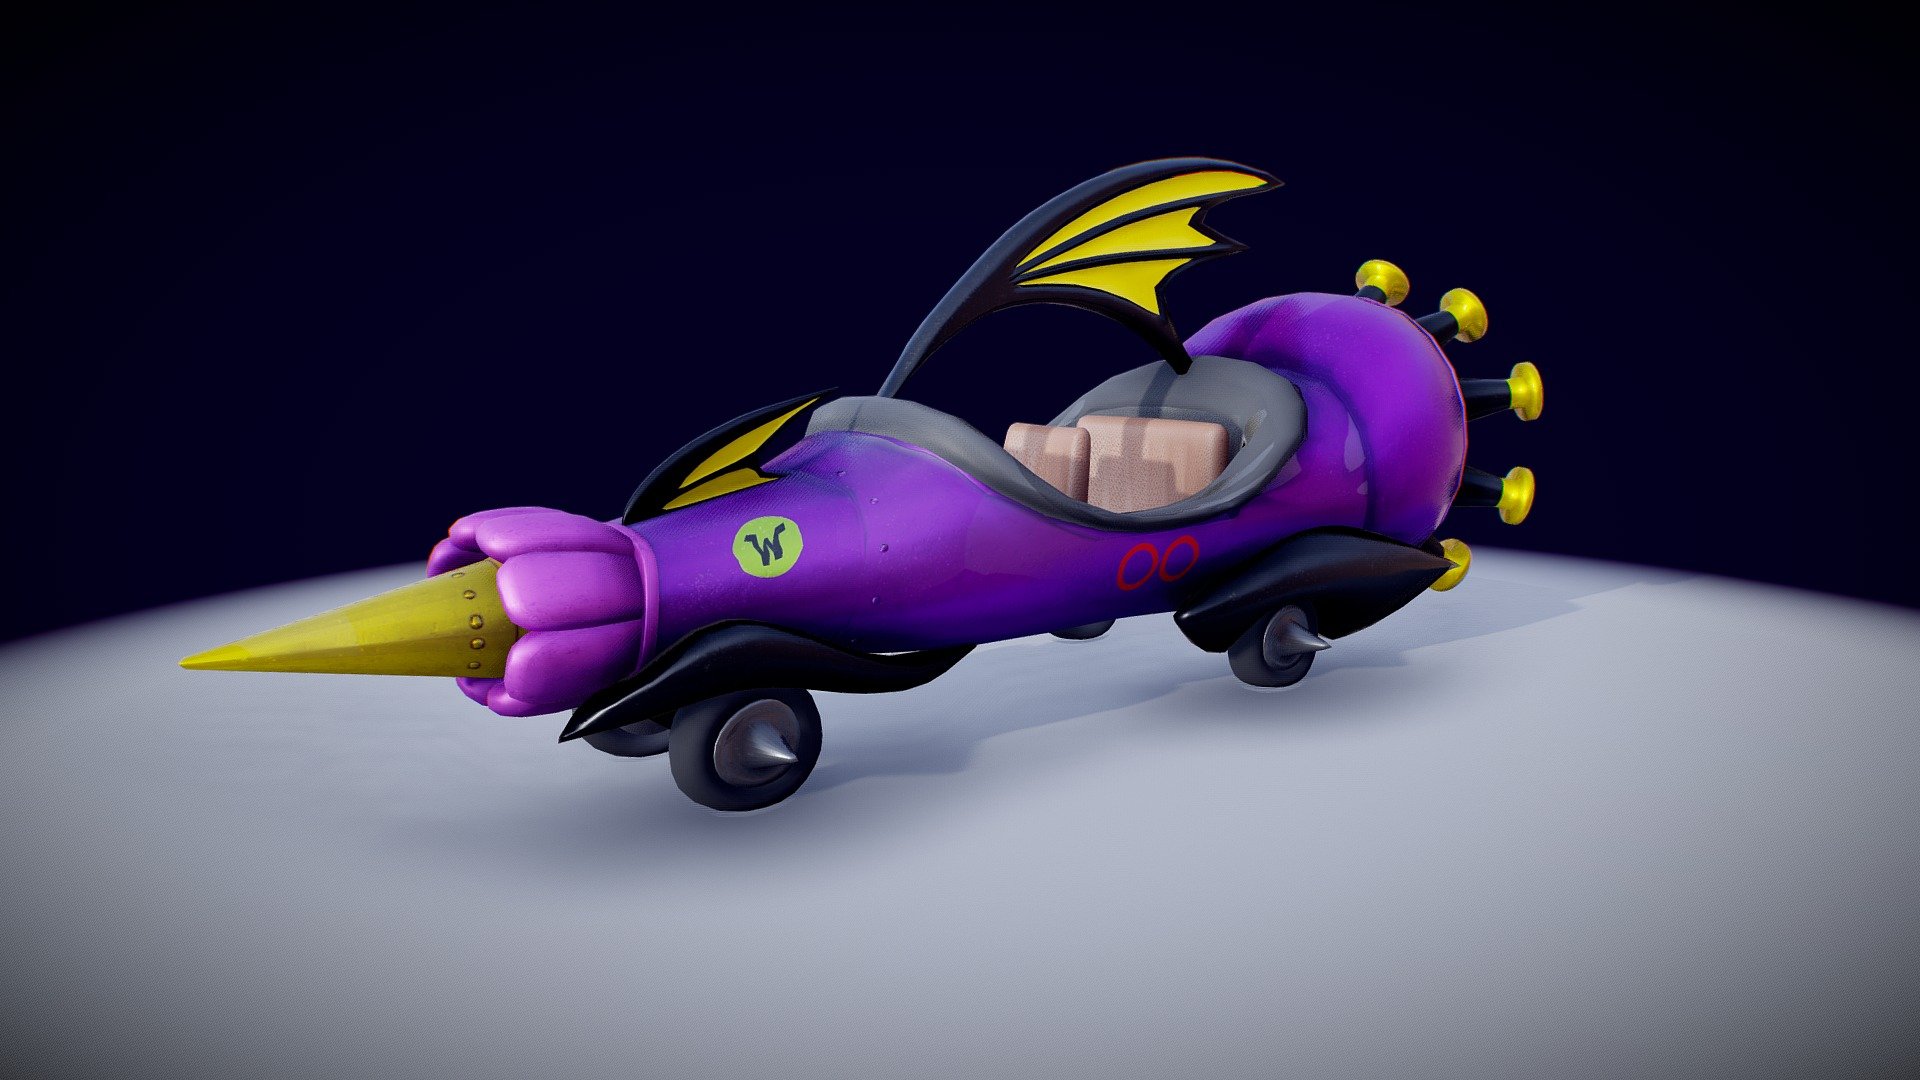 The Mean Machine is the number 00 car. It is a purple, rocket-powered car with an abundance of concealed weapons and ability to fly. It is the fastest car in the races, easily passing the field at will, though Dastardly prefers to win by cheating 3d model